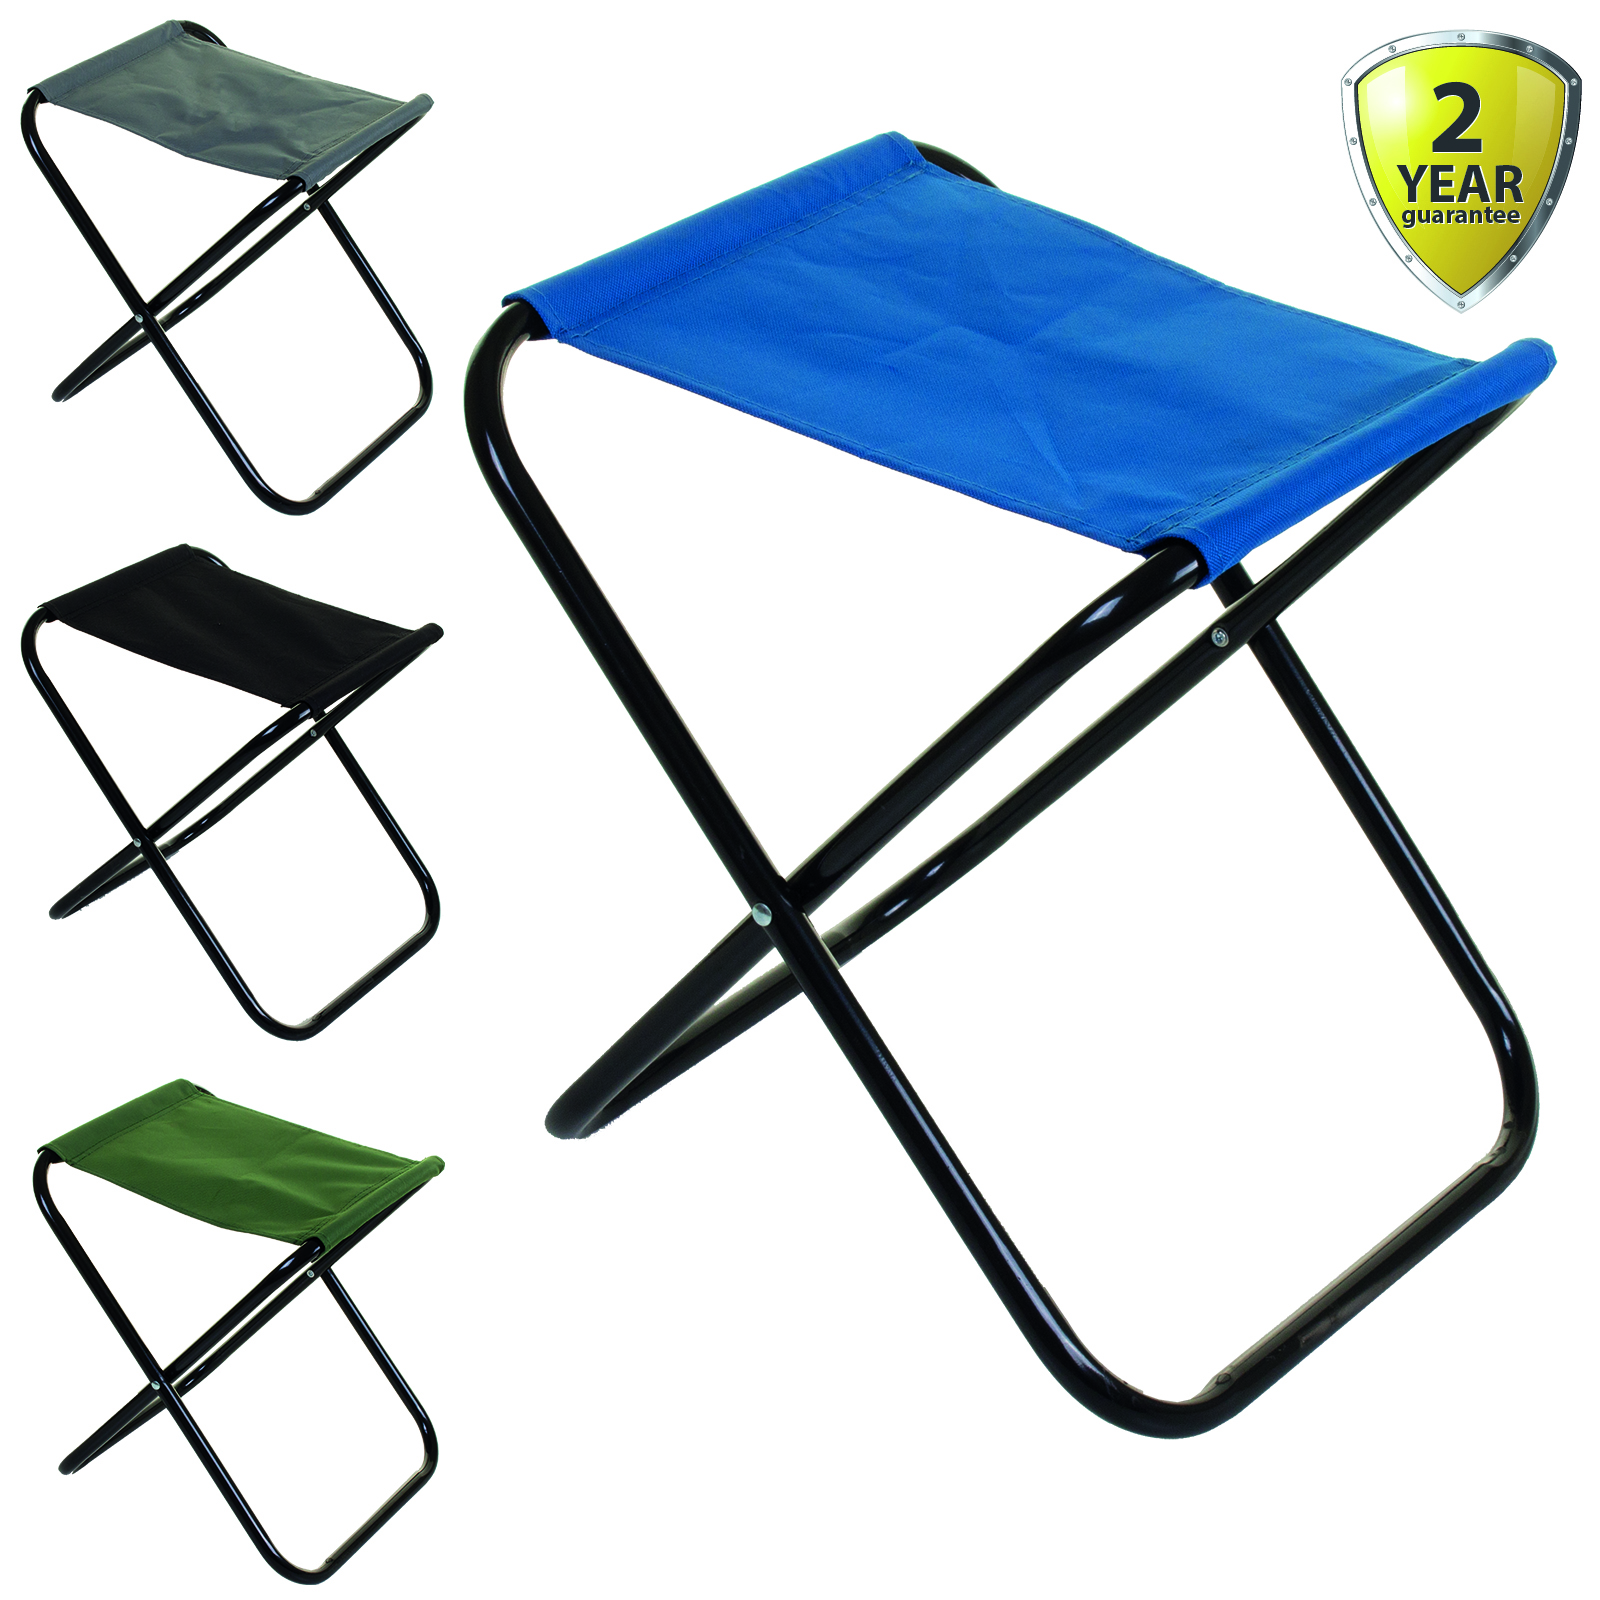 details about camping stool outdoor folding seat hiking fishing festival  bbq picnic chair new